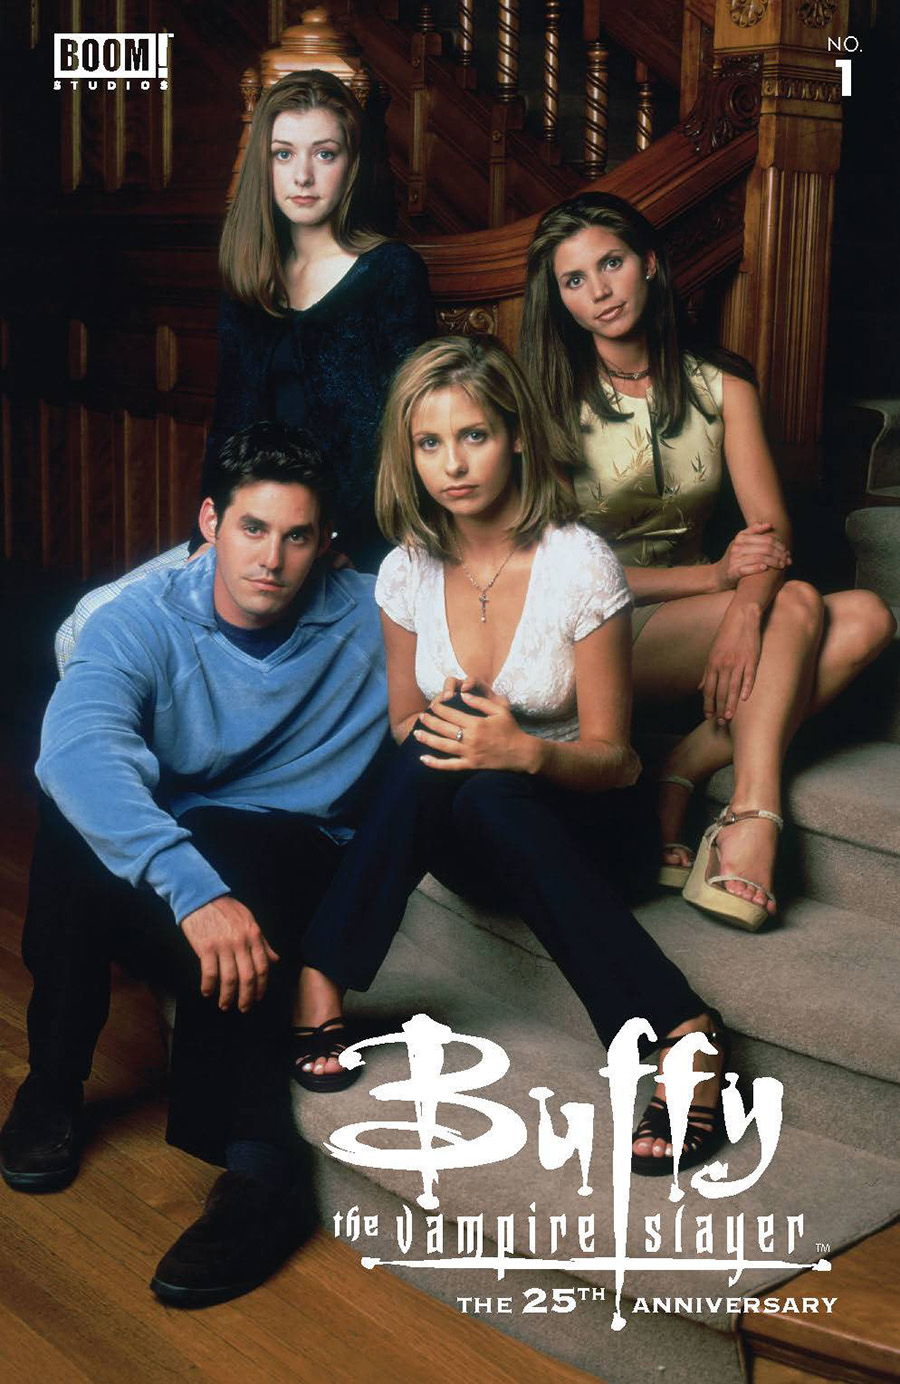 Buffy The Vampire Slayer 25th Anniversary Special #1 (One Shot) Cover F Variant Disney Archives Scooby Gang Photo Cover